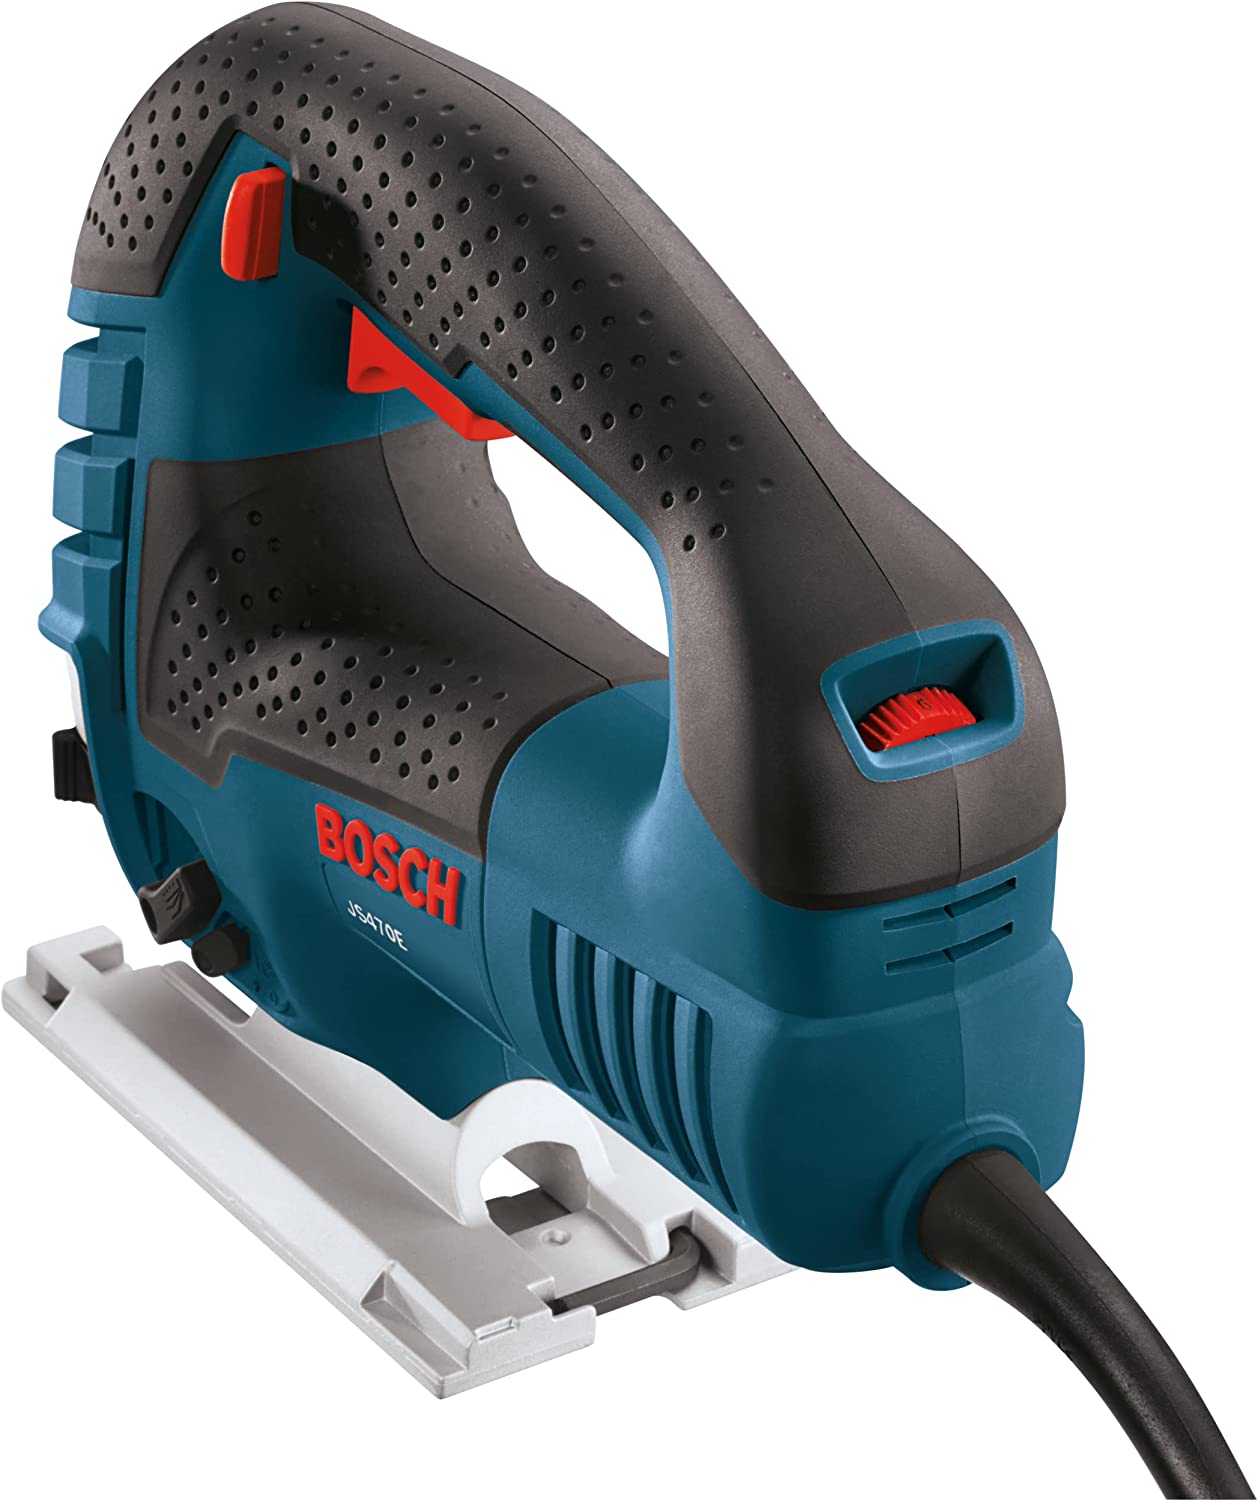 Bosch 7 Amp Corded Variable Speed Top-Handle Jig Saw Kit with Carrying Case